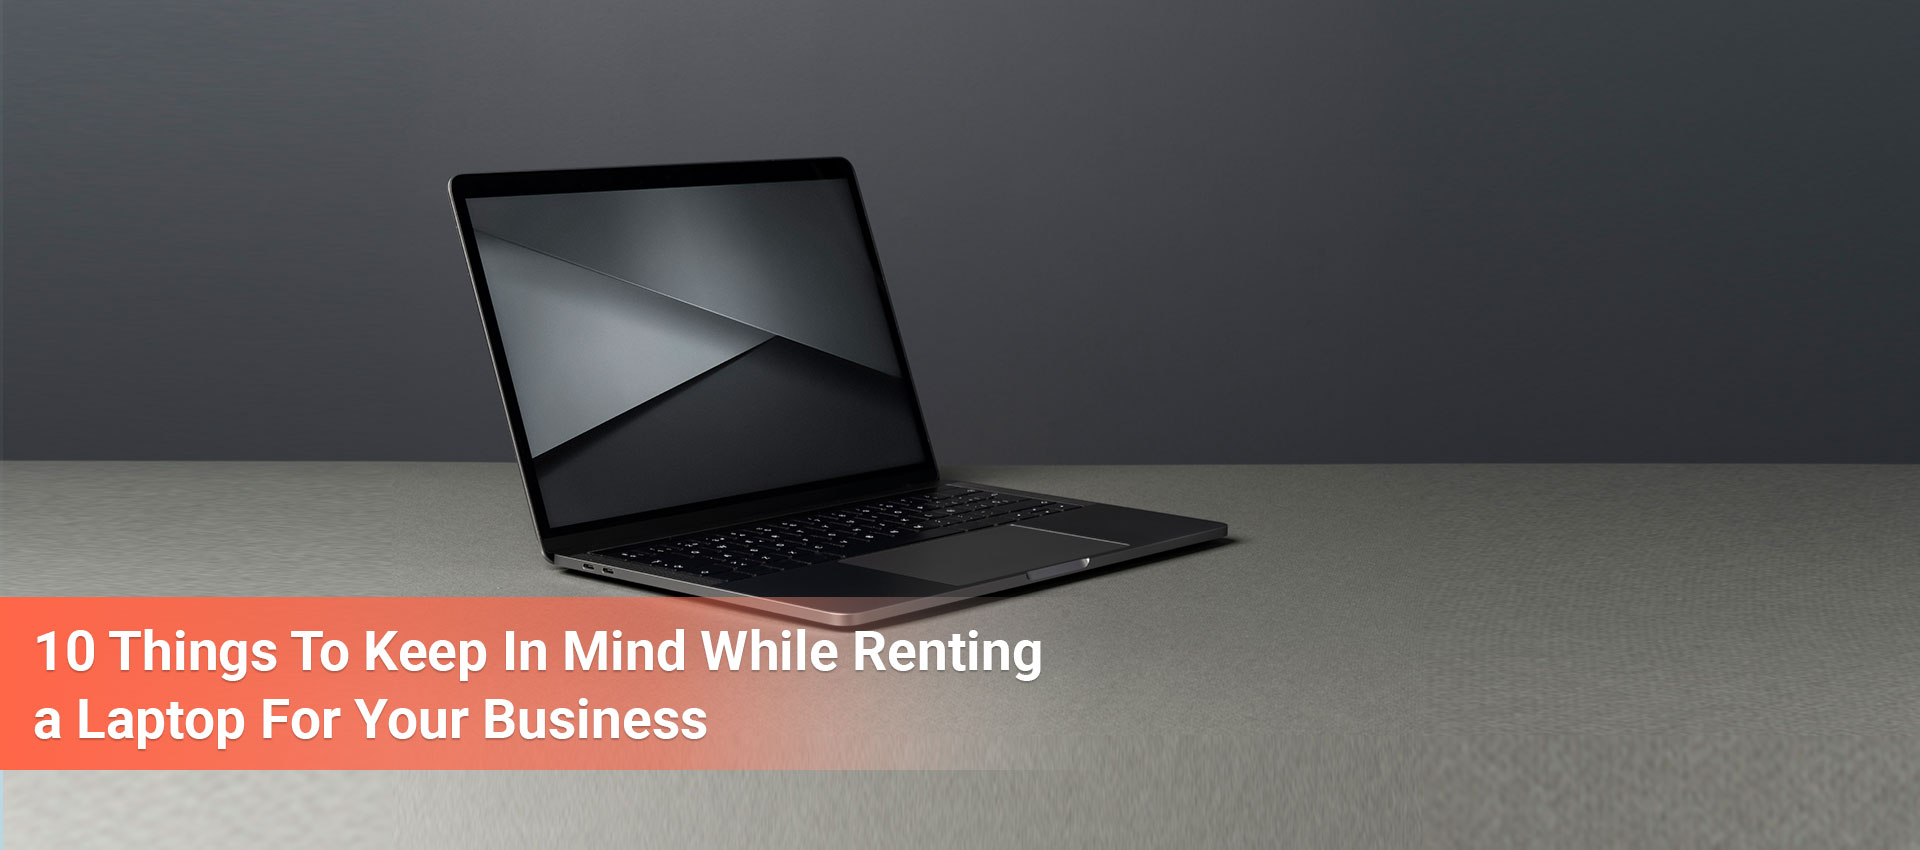 banner image of our blog on 10 things to keep in mind while renting a laptop for your business